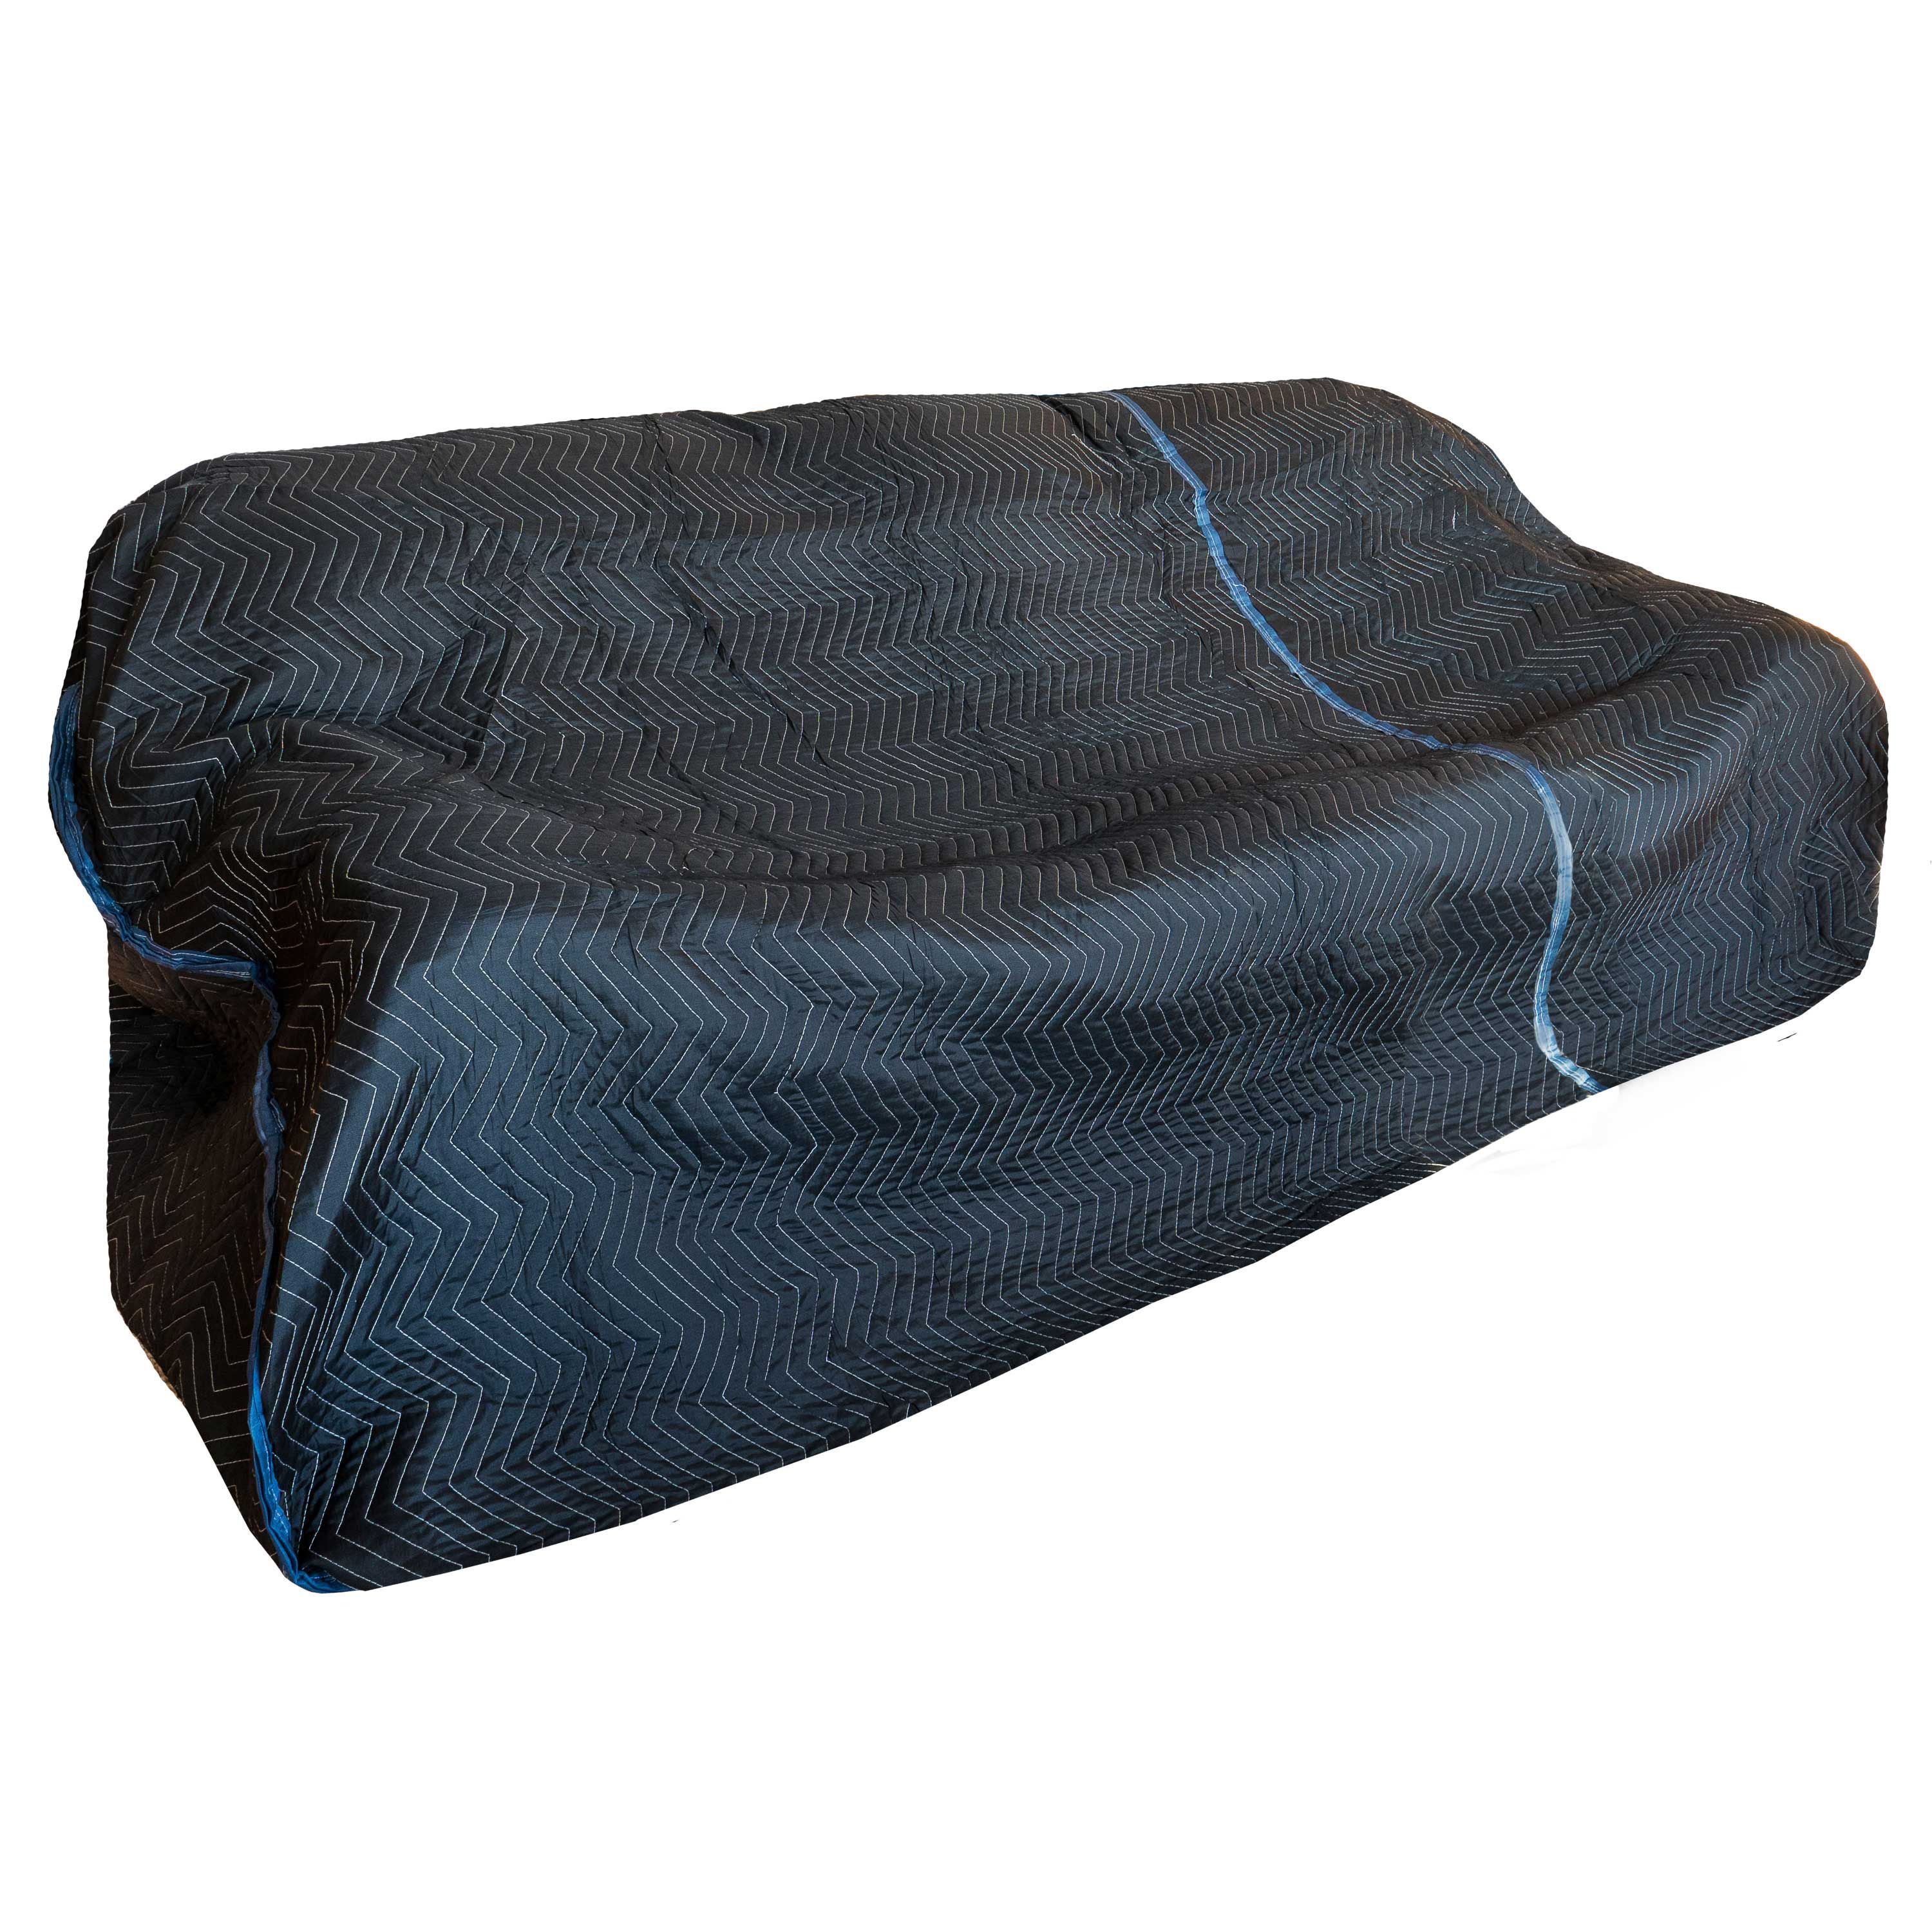 CRESNEL Furniture Cover Plastic Bag for Moving Protection and Long Term Storage Loveseat 2 Packs 